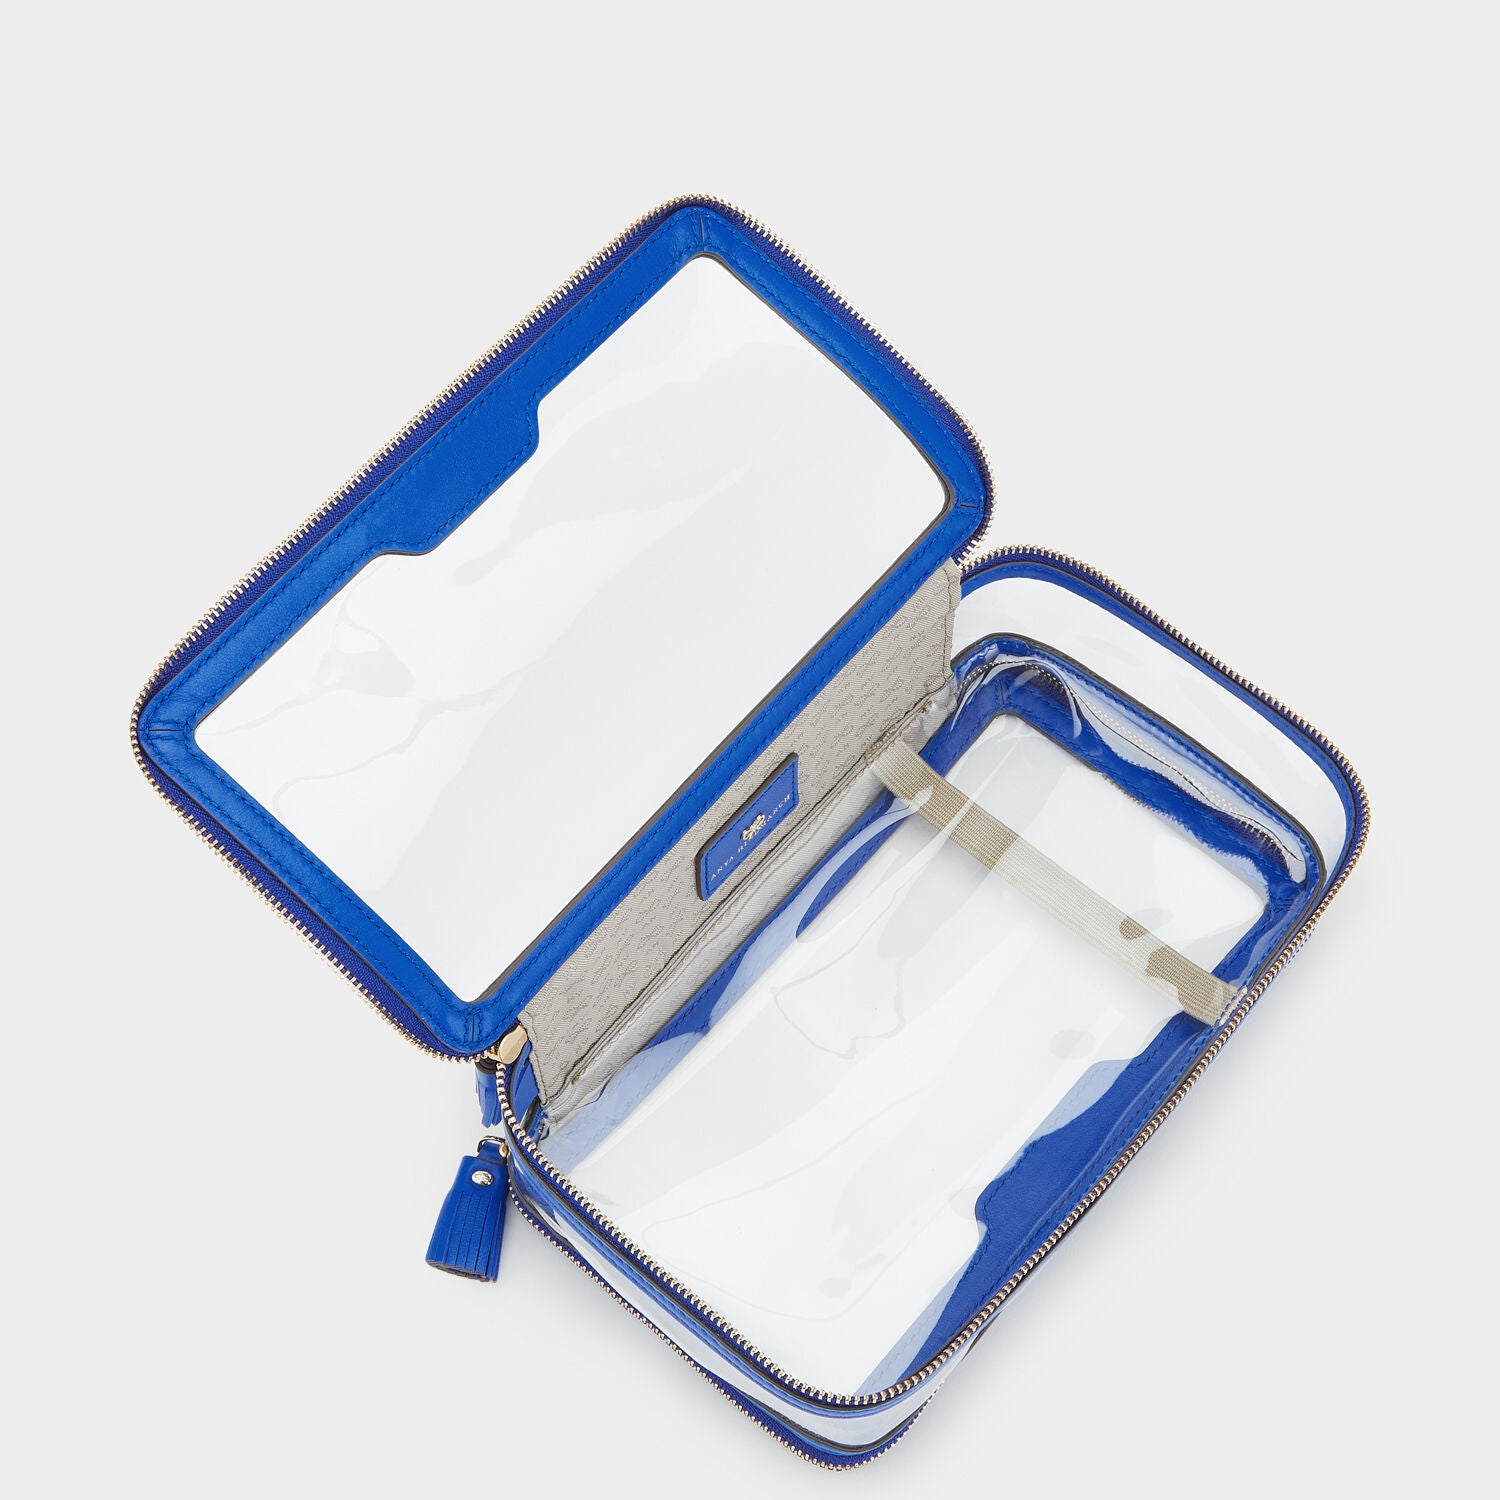 In-Flight Case -

                  
                    Circus Leather in Electric Blue -
                  

                  Anya Hindmarch UK
